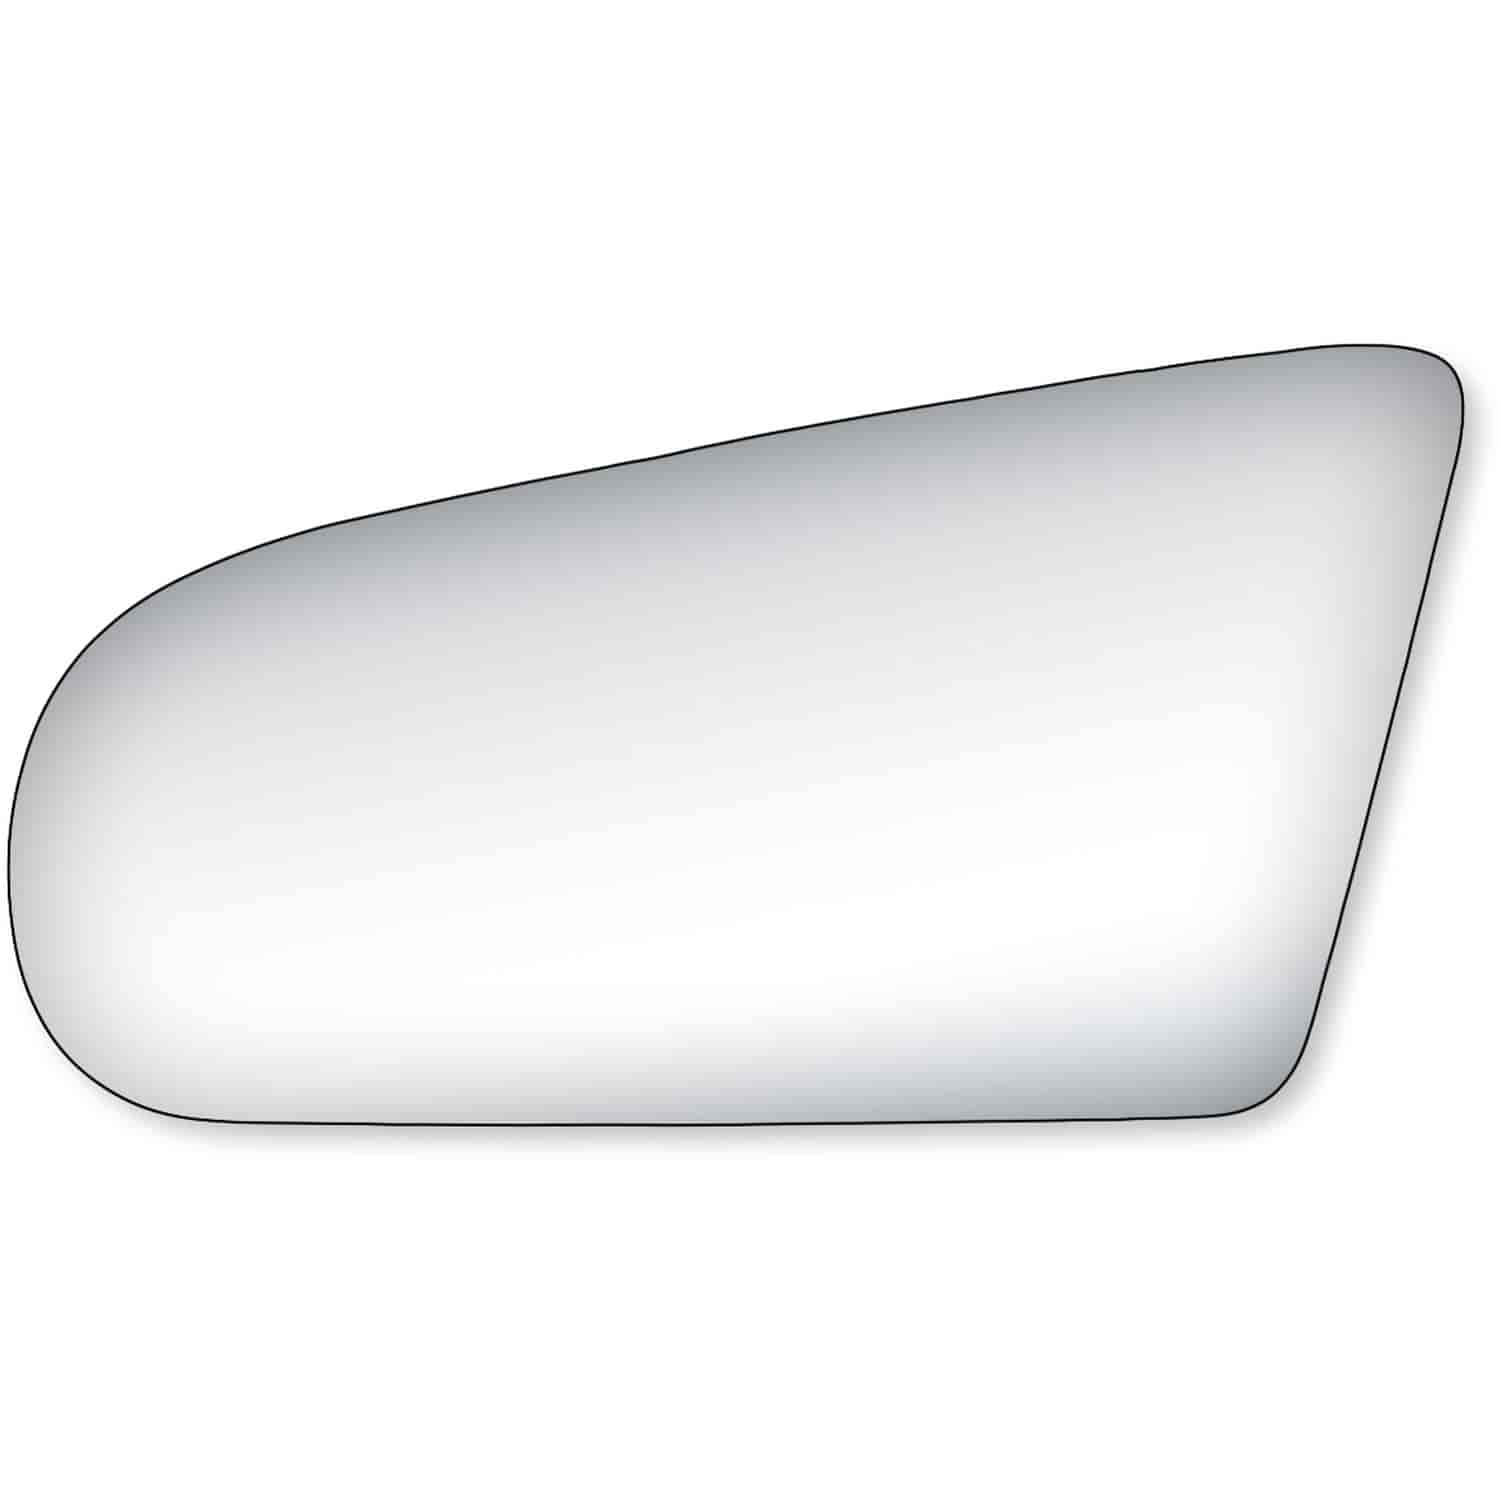 Replacement Glass for 91-96 Coupe; 91-95 Sedan; 91-95